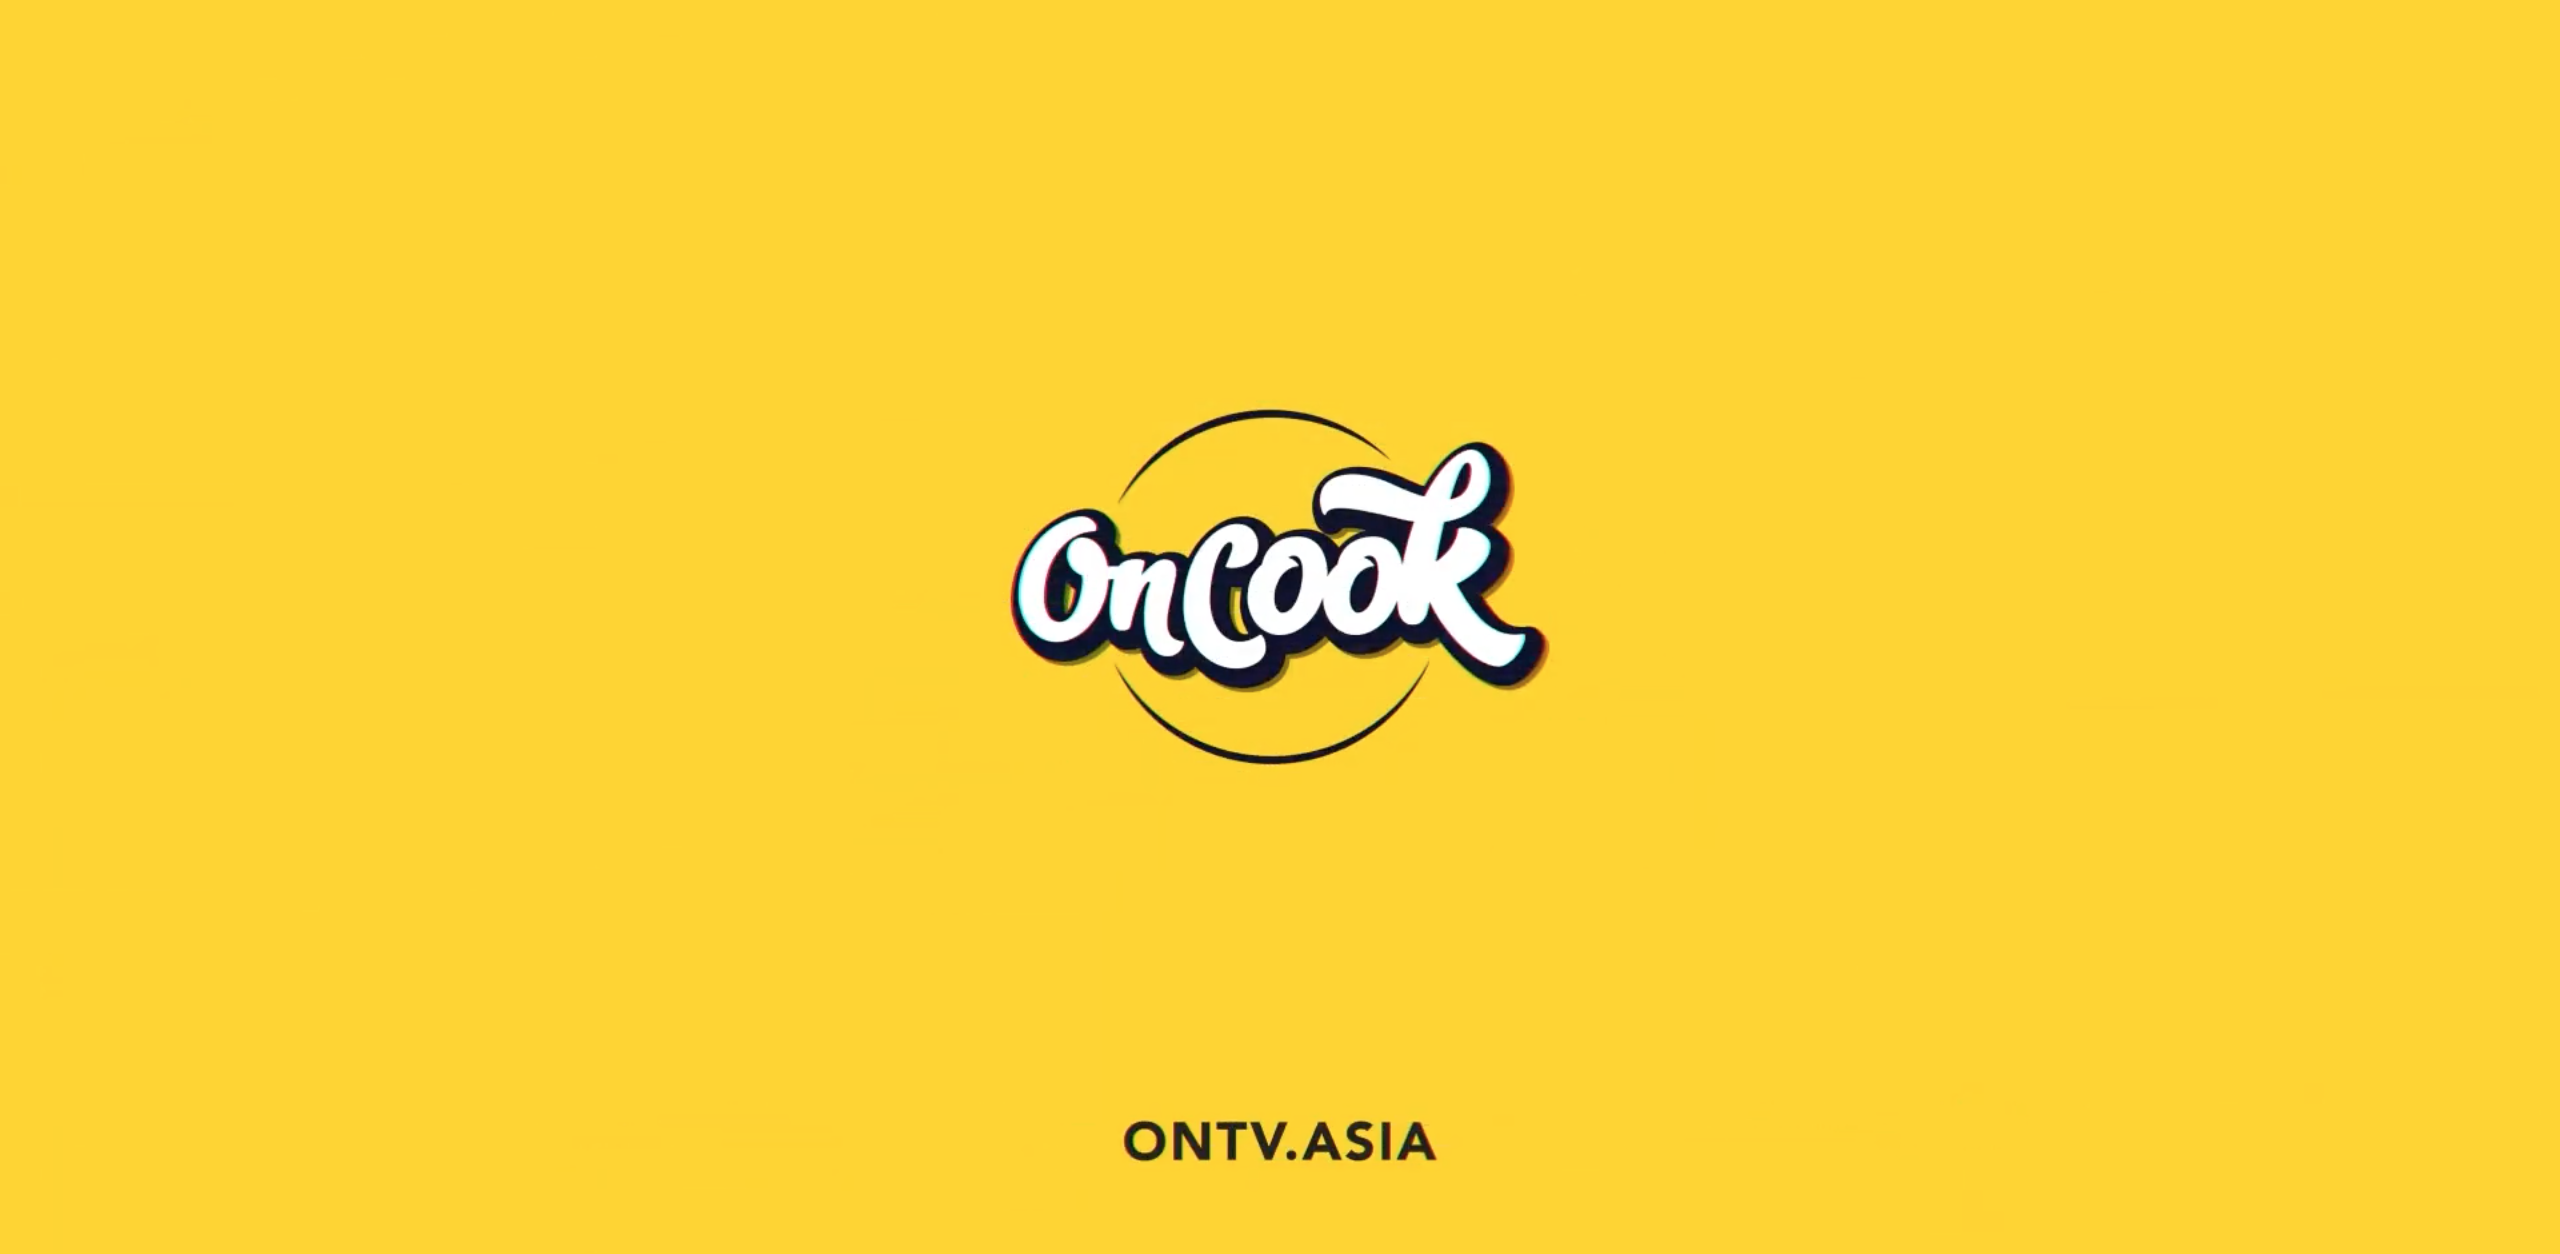 On Cook | Empire Media